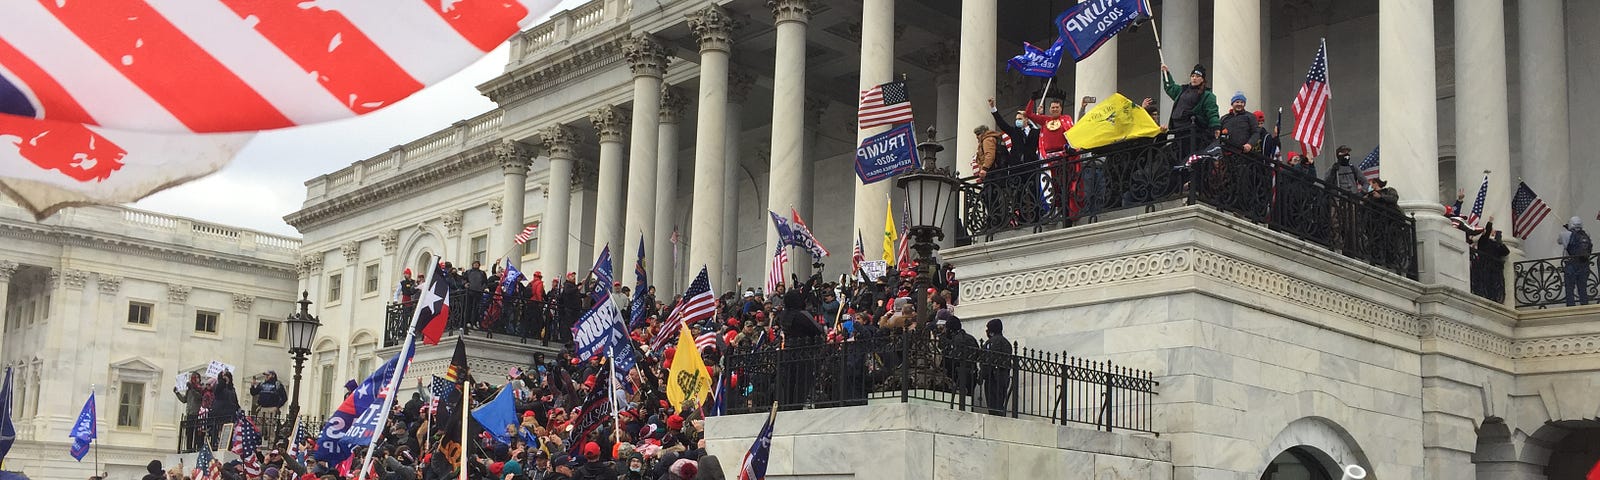 Supporters of former President Trump storming the US Capitol on January 6th 2021.